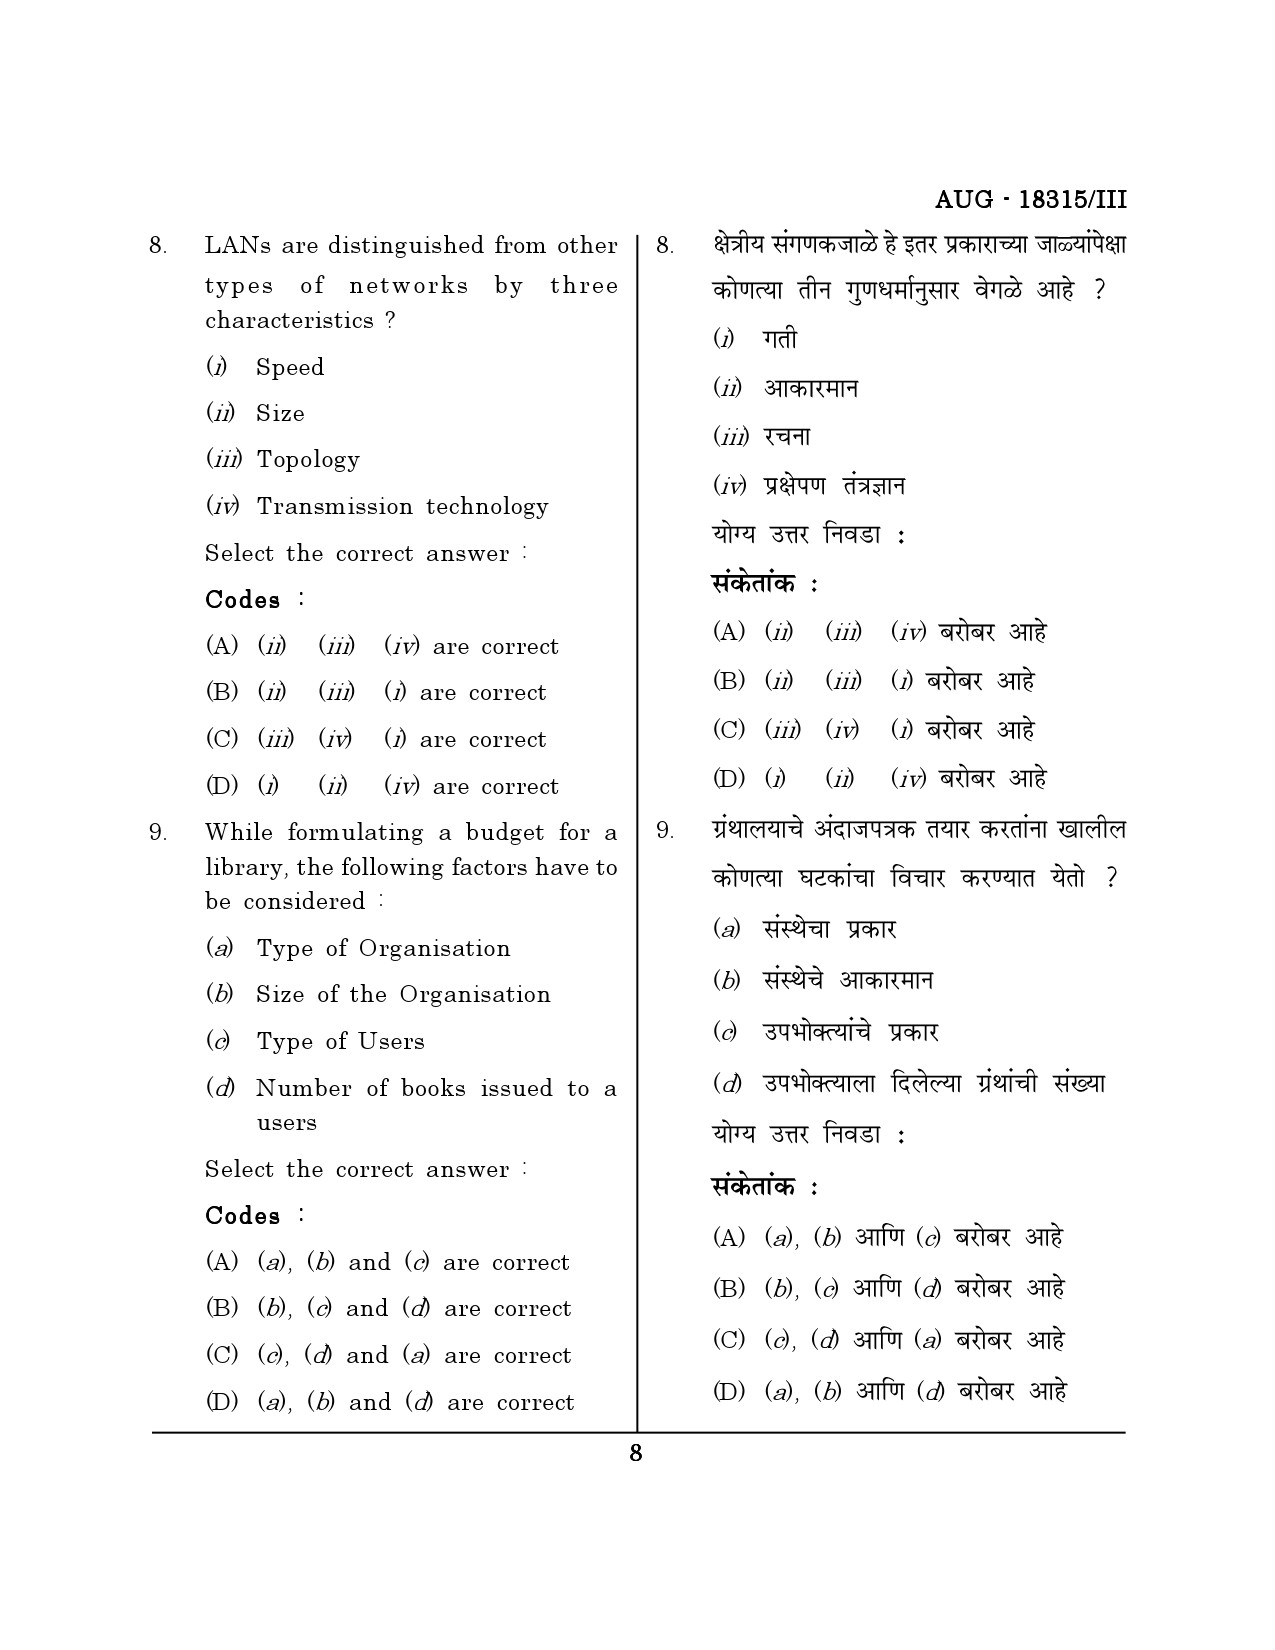 Maharashtra SET Library Information Science Question Paper III August 2015 7